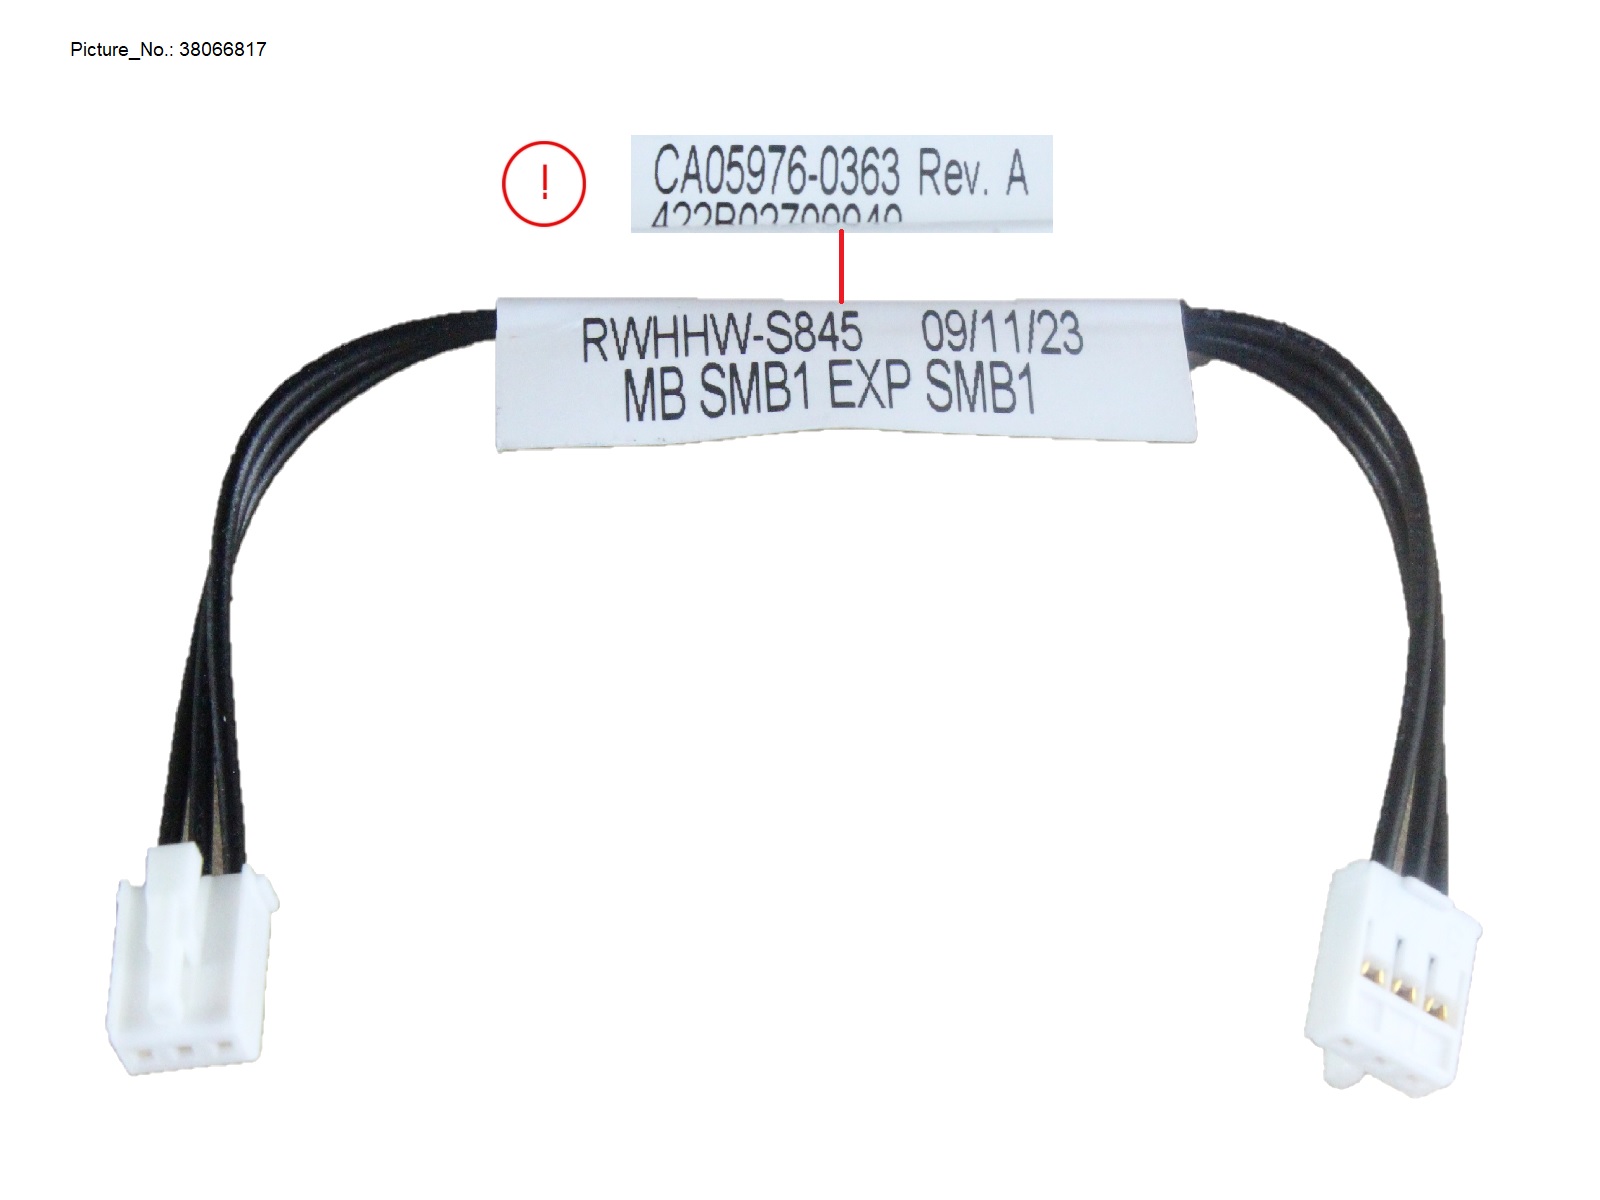 OOB SIGNAL CABLE, MB TO EXPANDER